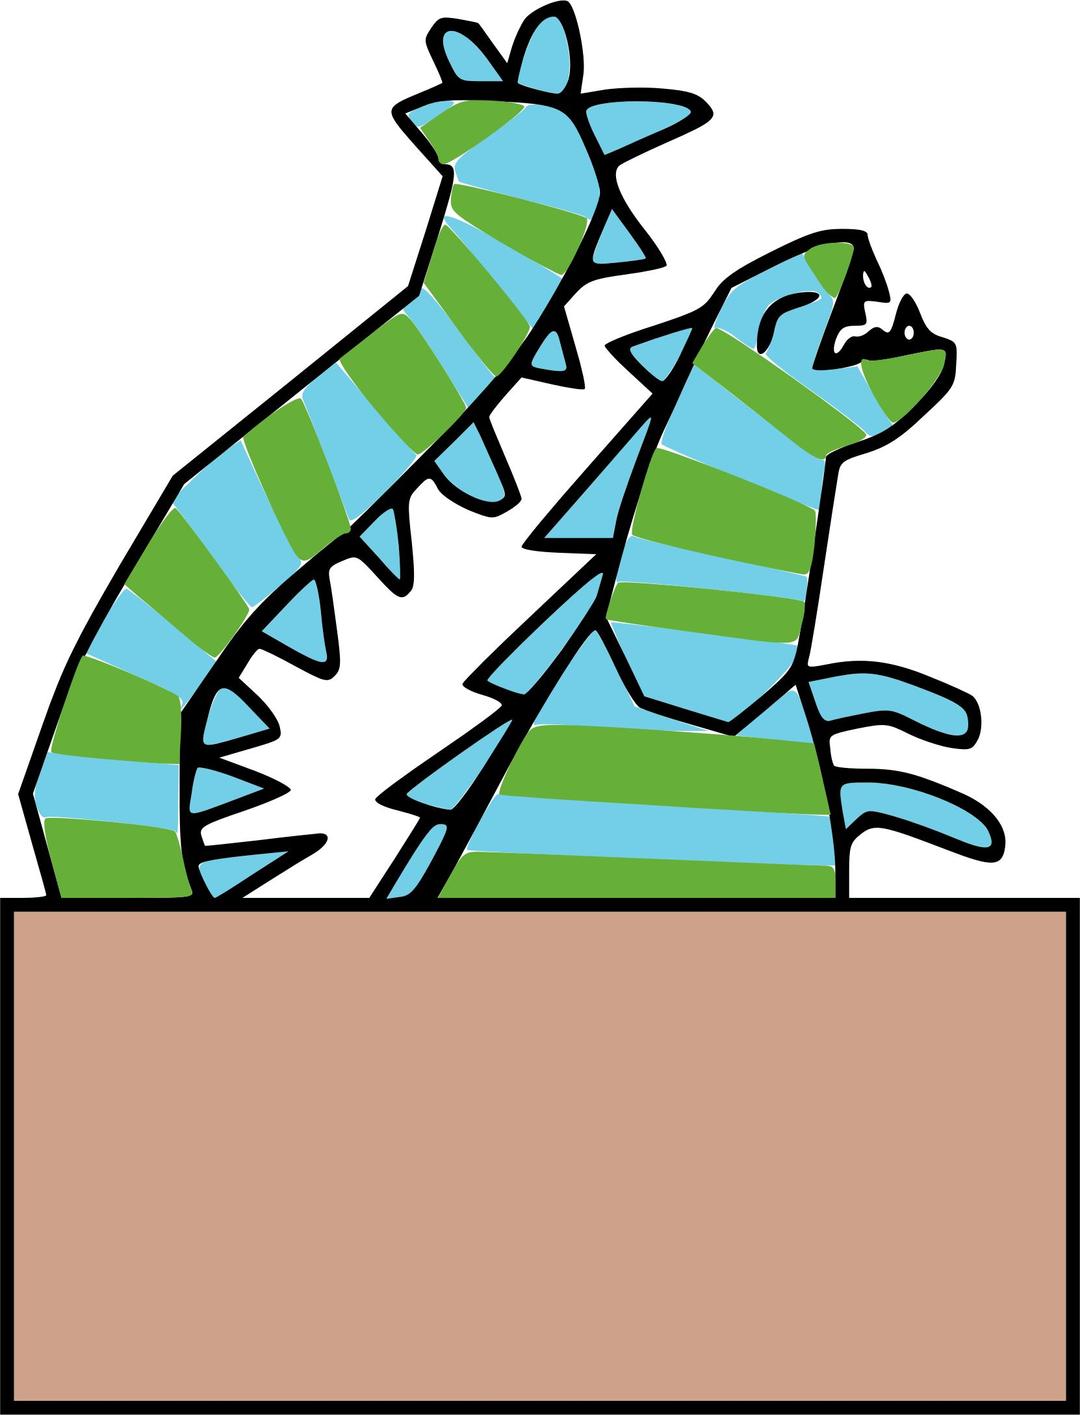 Dinosaur in a Box png transparent